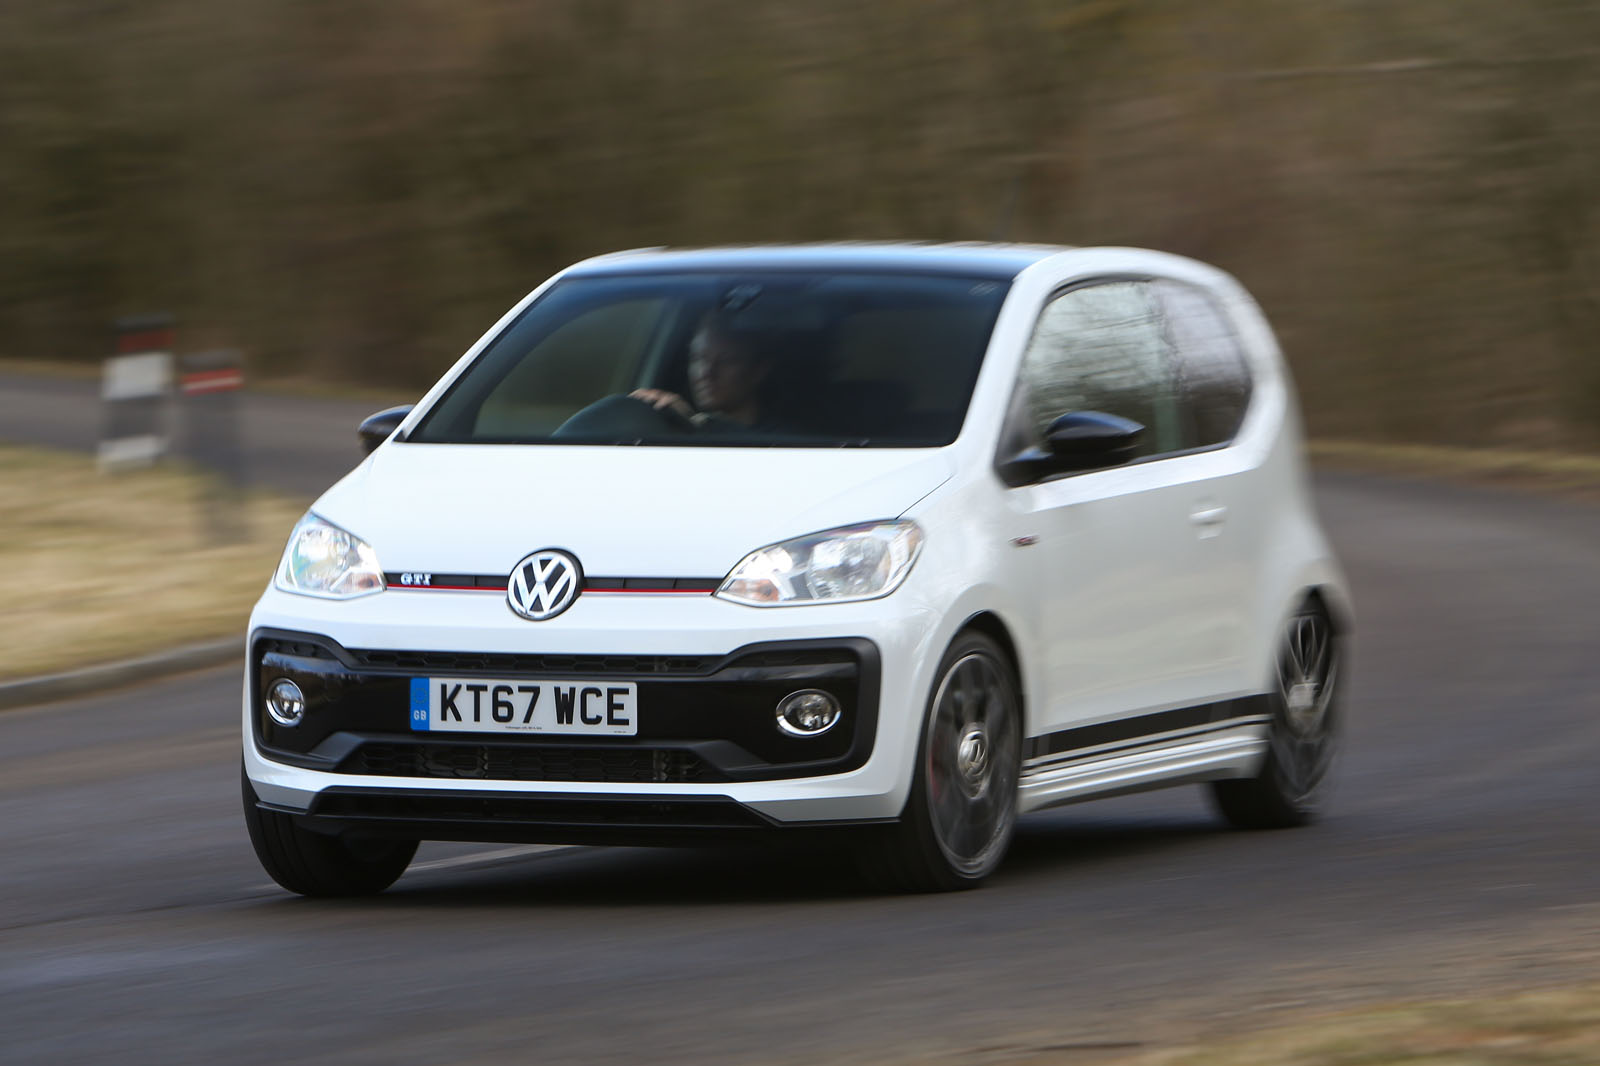 https://www.autocar.co.uk/sites/autocar.co.uk/files/images/car-reviews/first-drives/legacy/volkswagen-up-gti-2018-front-quarter-tracking.jpg